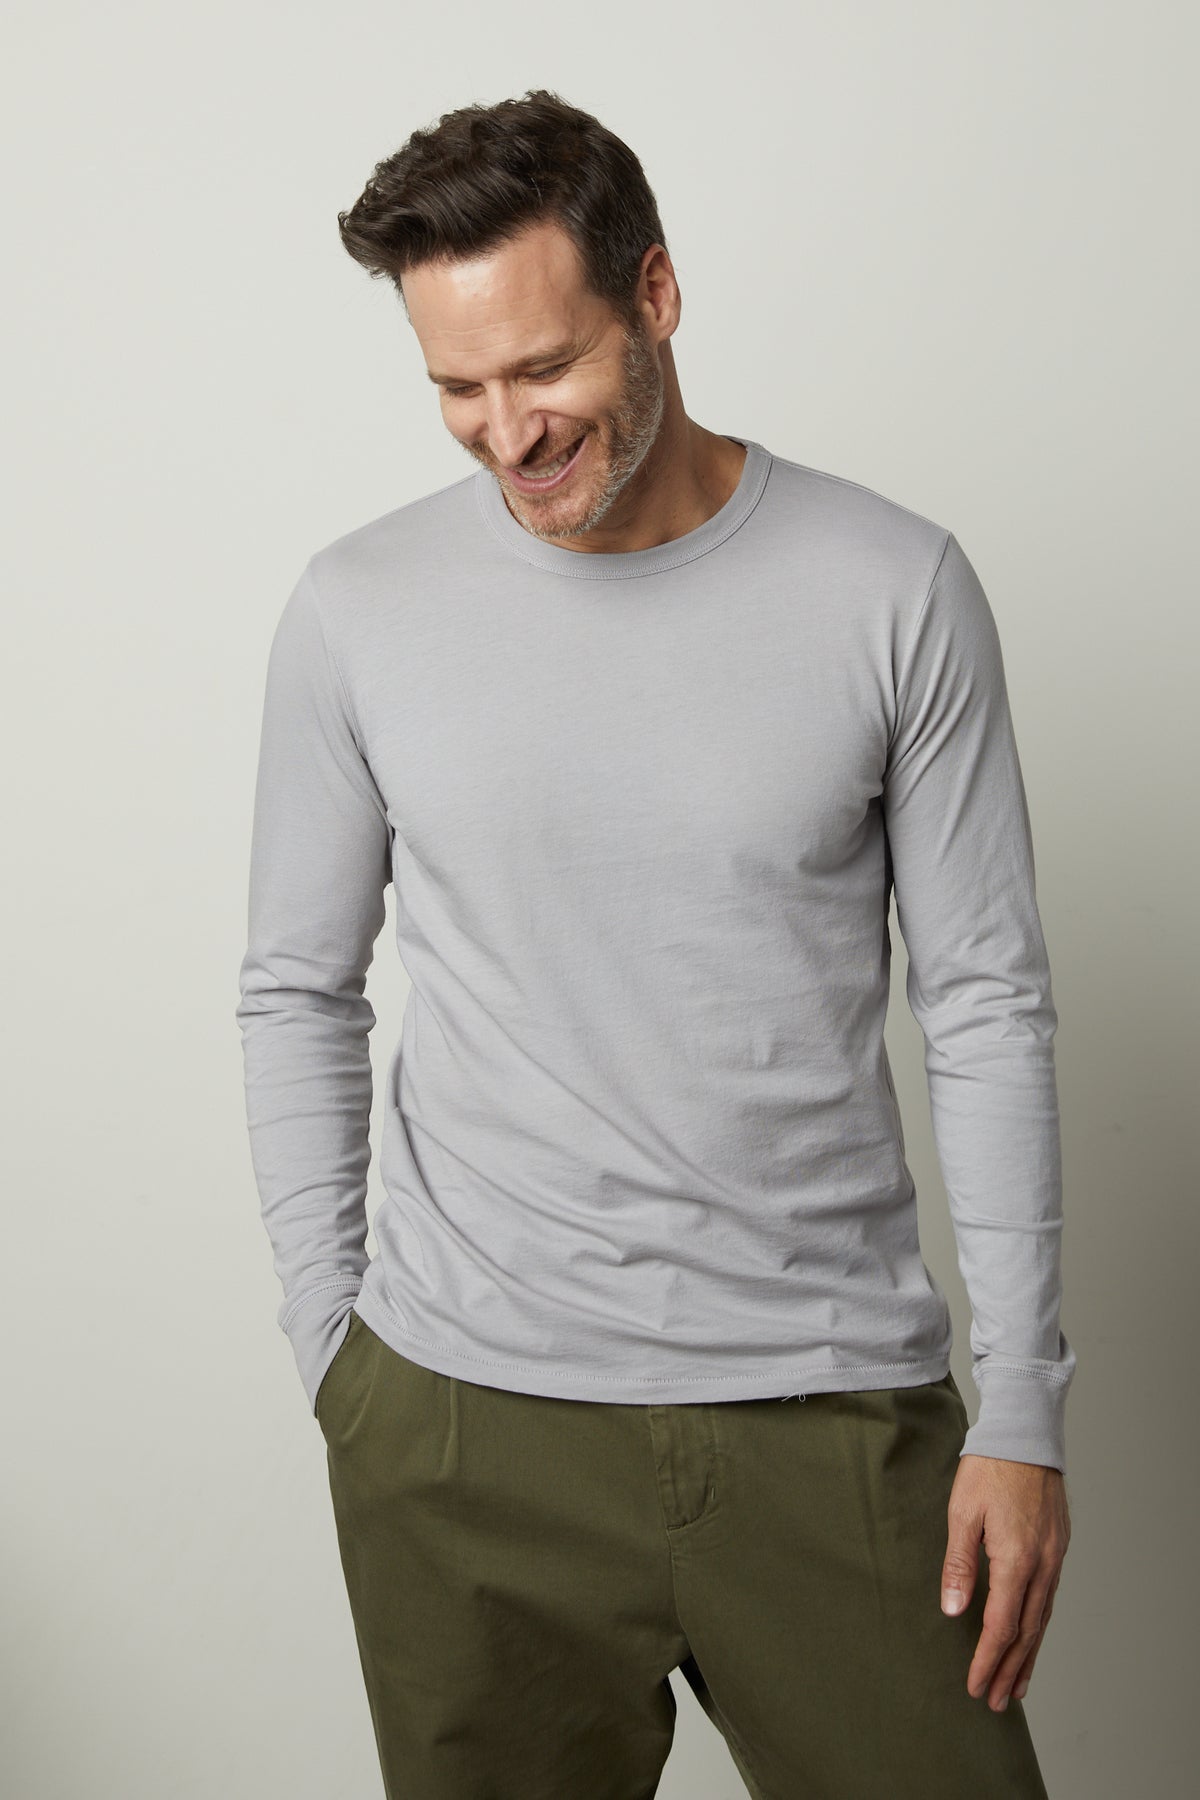 A man wearing a Velvet by Graham & Spencer STRAUSS CREW NECK TEE and green pants.-26846183096513